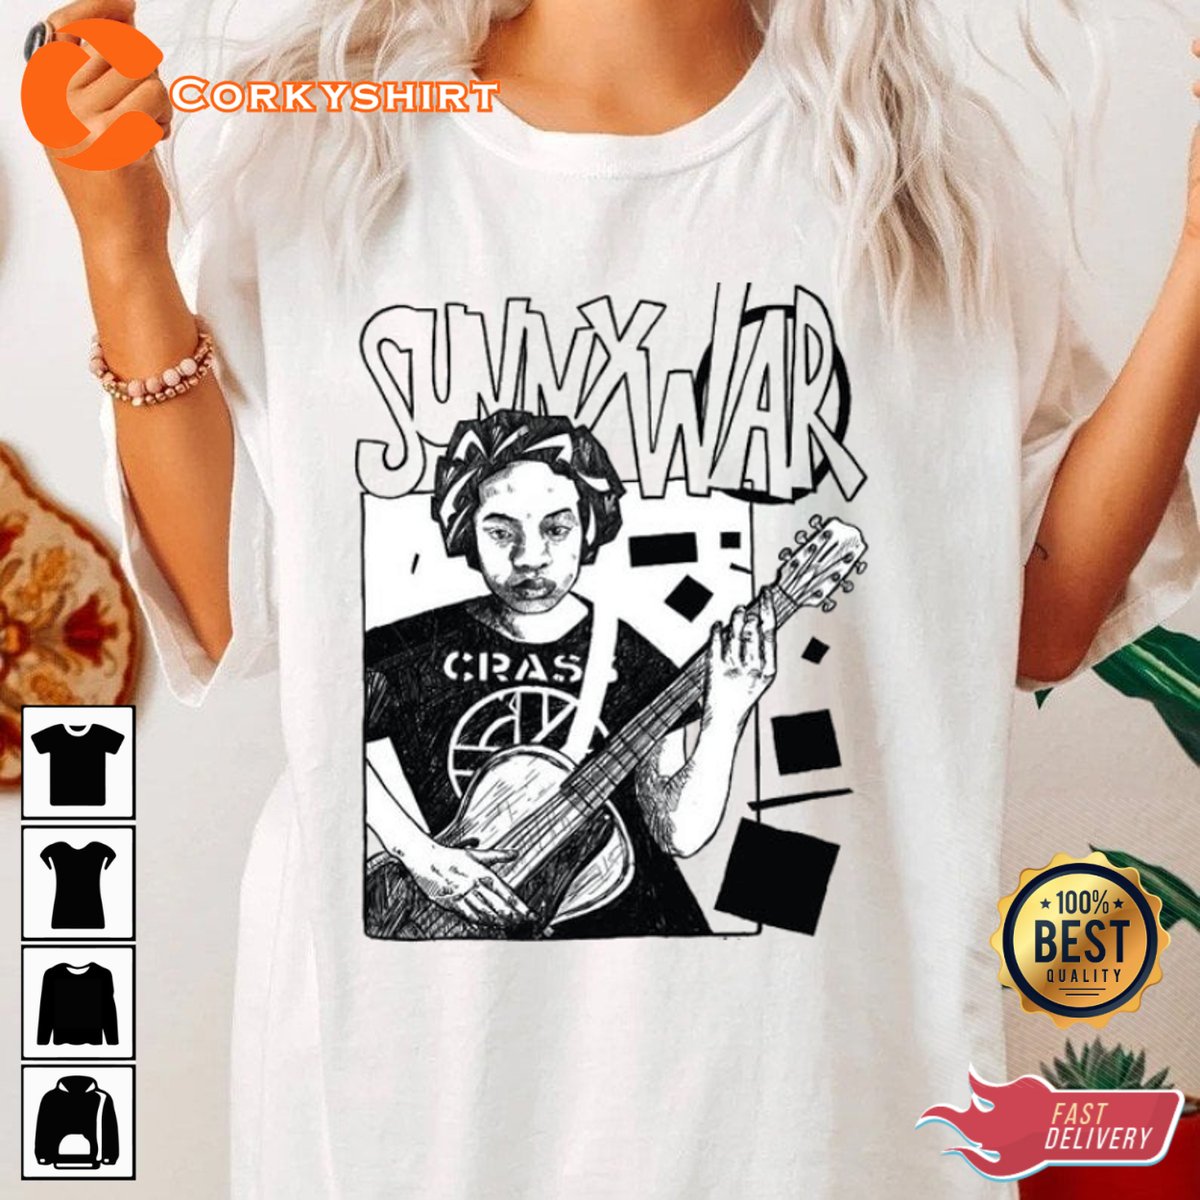 You are looking for great way to express your love for Sunny War's music, what better than Sunny War Shirt?
corkyshirt.com/sunny-war-musi…
#Music #SunnyWar #Seizeshirt